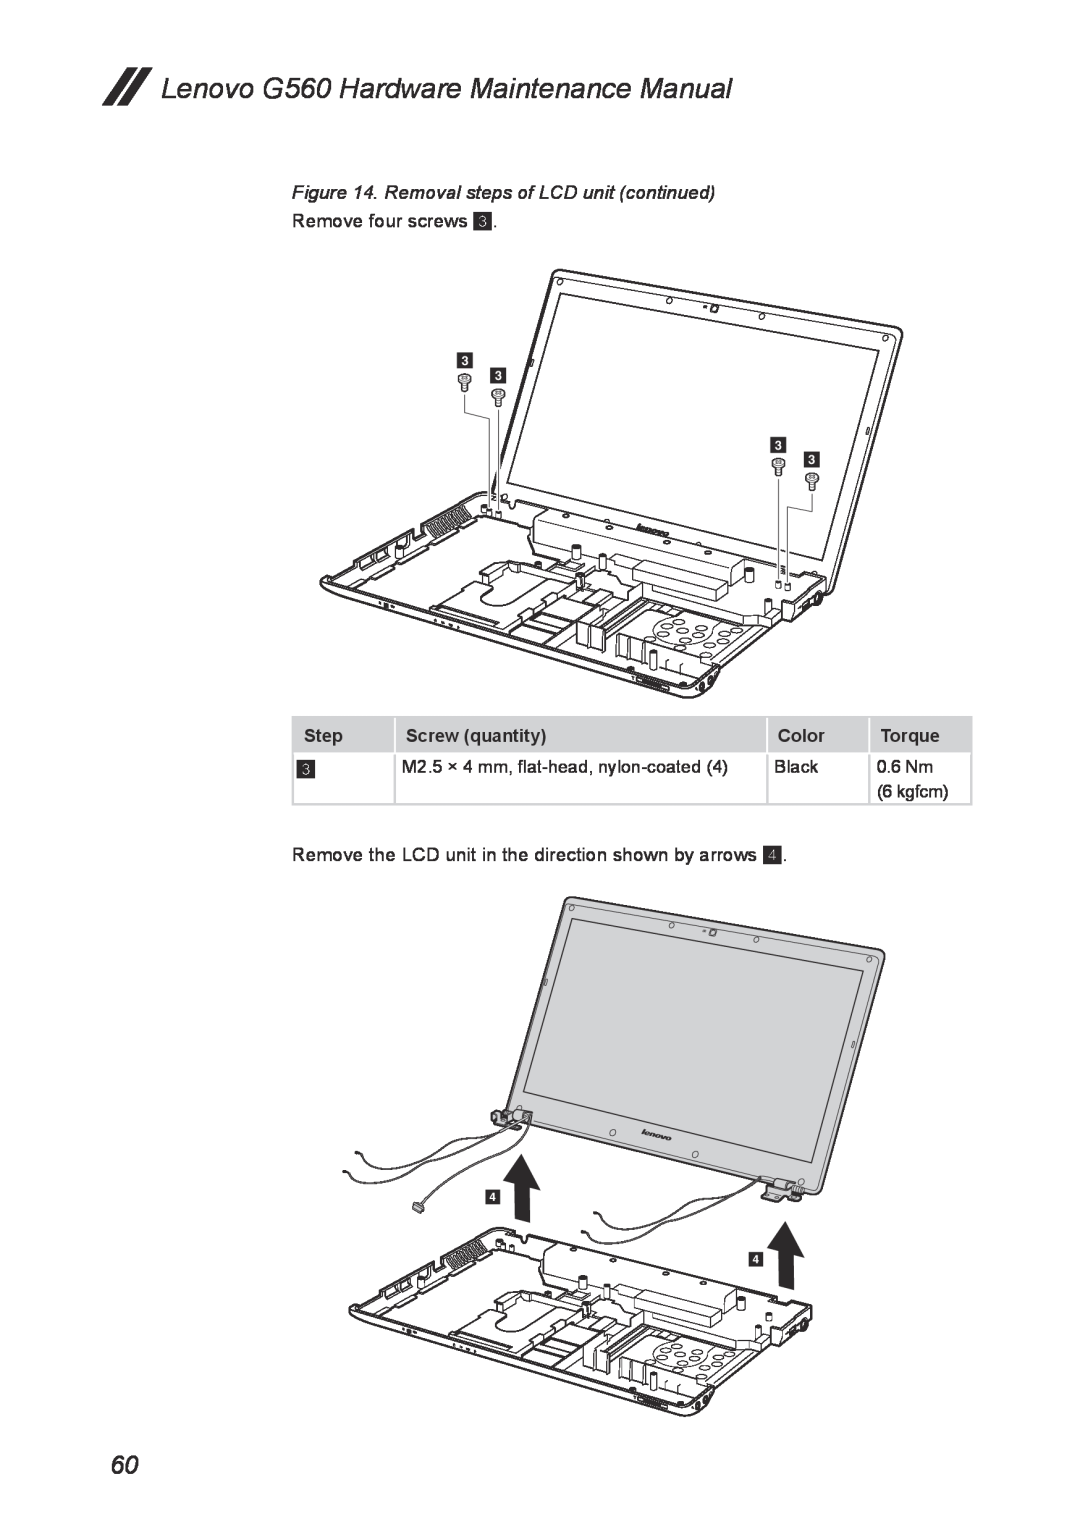 Lenovo manual Lenovo G560 Hardware Maintenance Manual, Removal steps of LCD unit continued, Remove four screws 